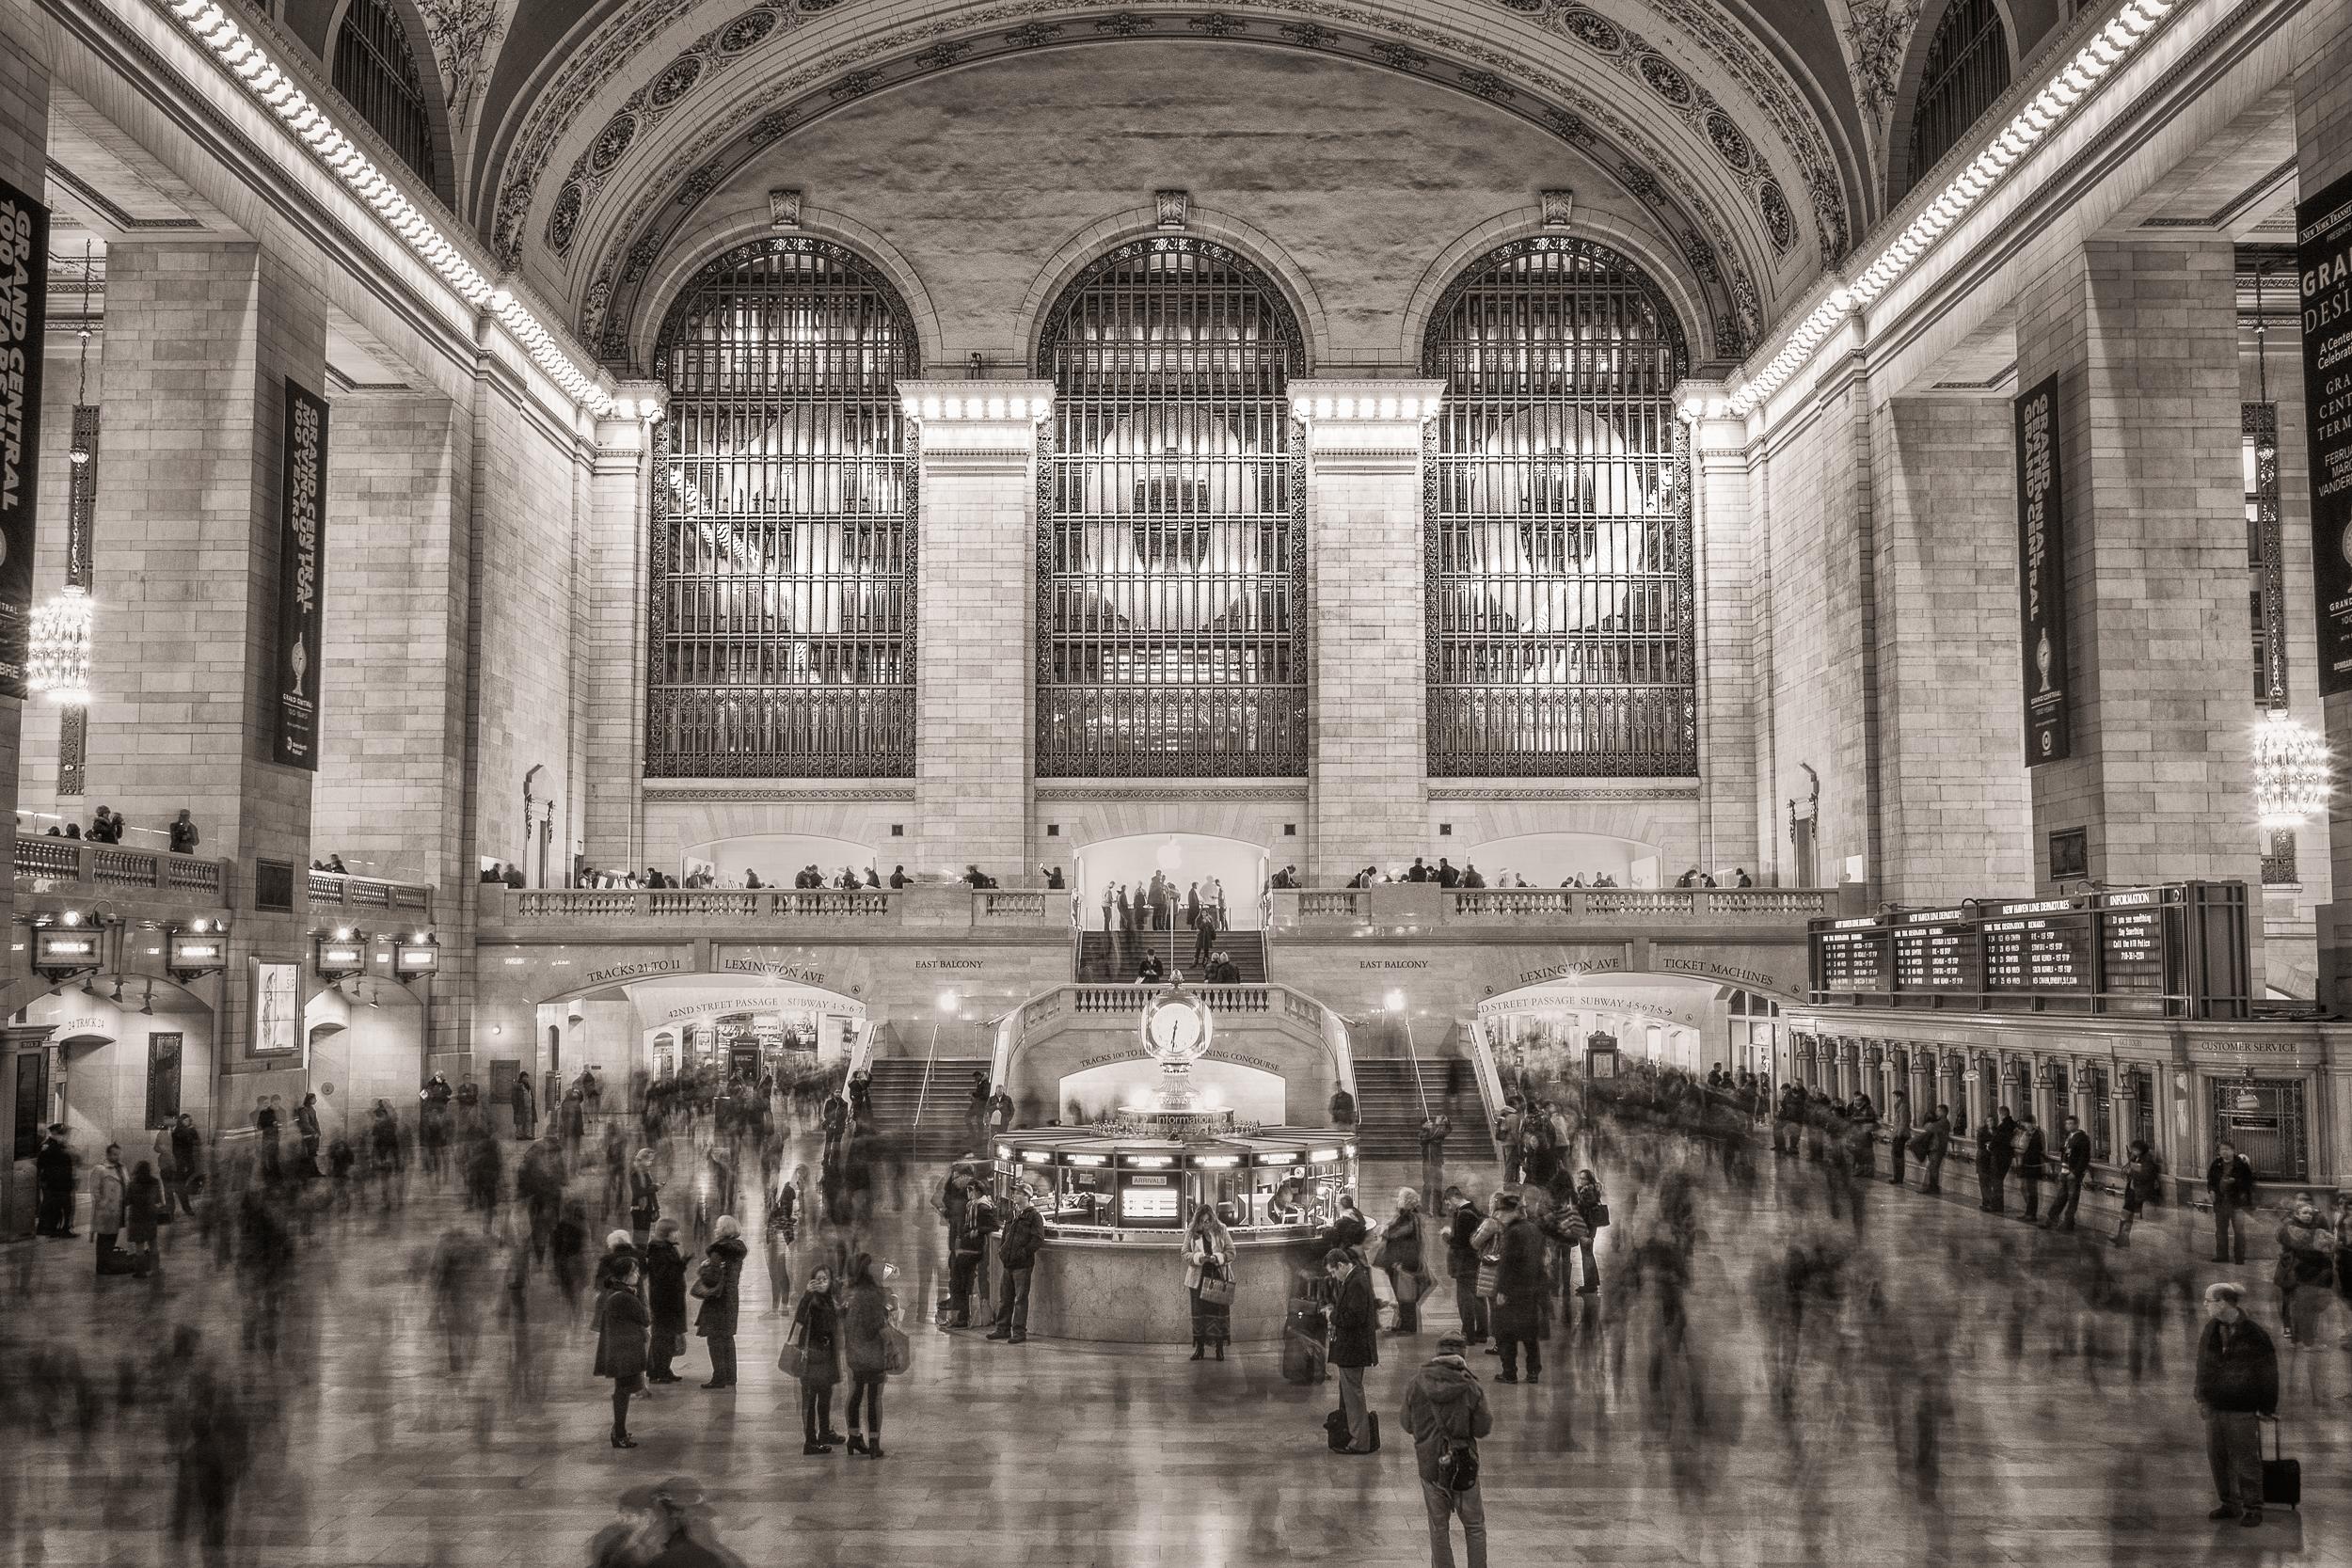 Peter Mendelson Color Photograph - "Grand Central at 100, " Contemporary Architectural Urban Photograph, 24" x 36"